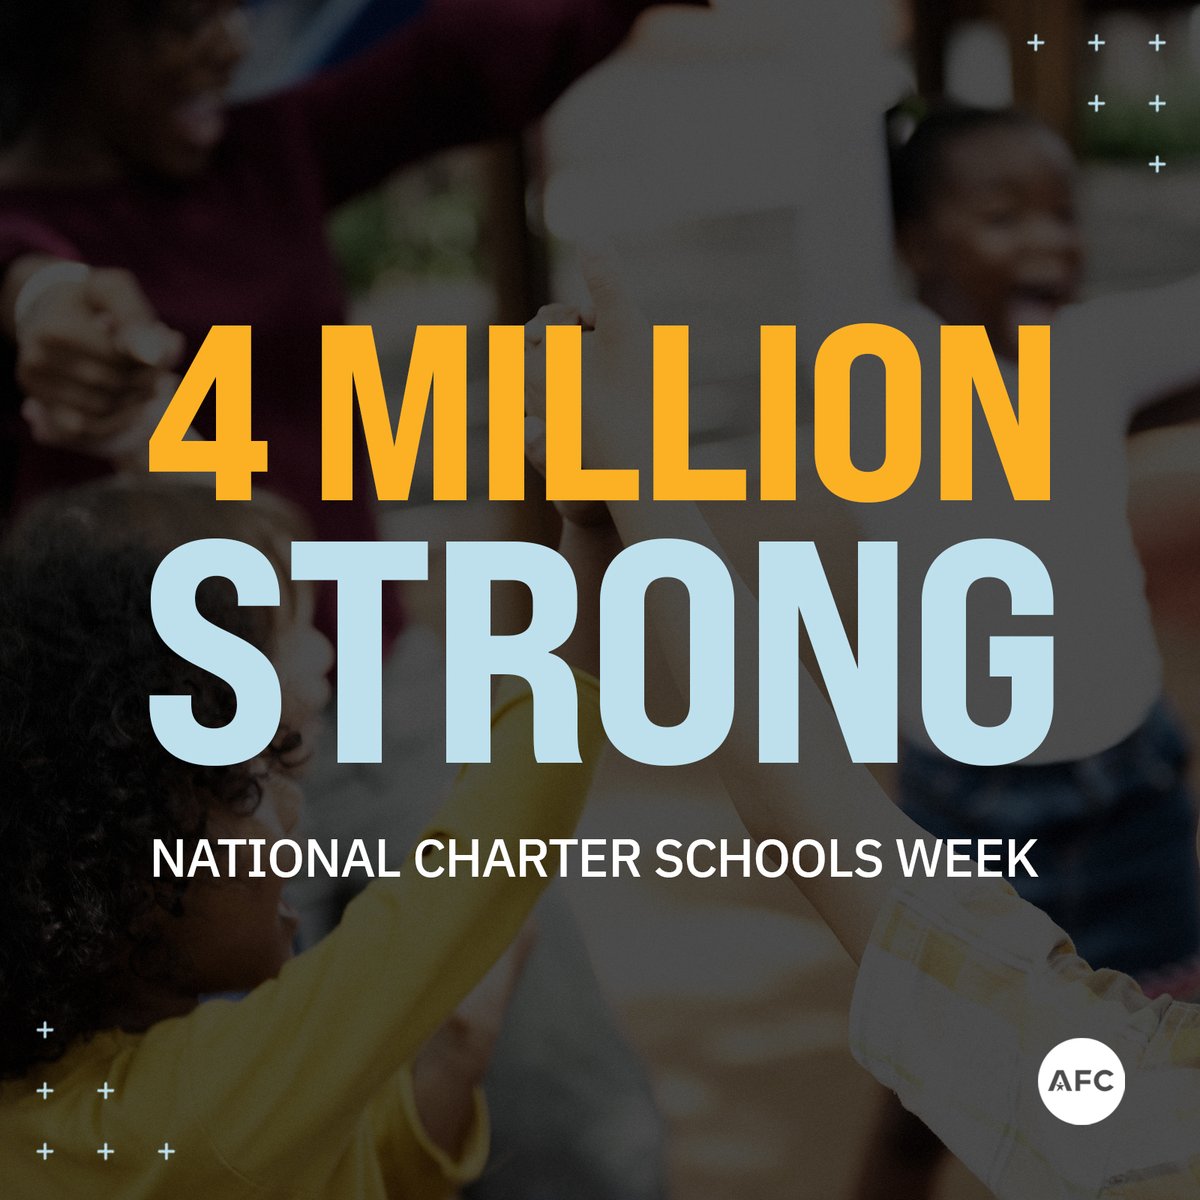 Join AFC in celebrating National #CharterSchoolsWeek 2024! We're grateful that nearly 4M students have access to this school choice option at over 8,000 charter schools. #WeAreCharter #SchoolChoice #SchoolChoiceNow @charteralliance